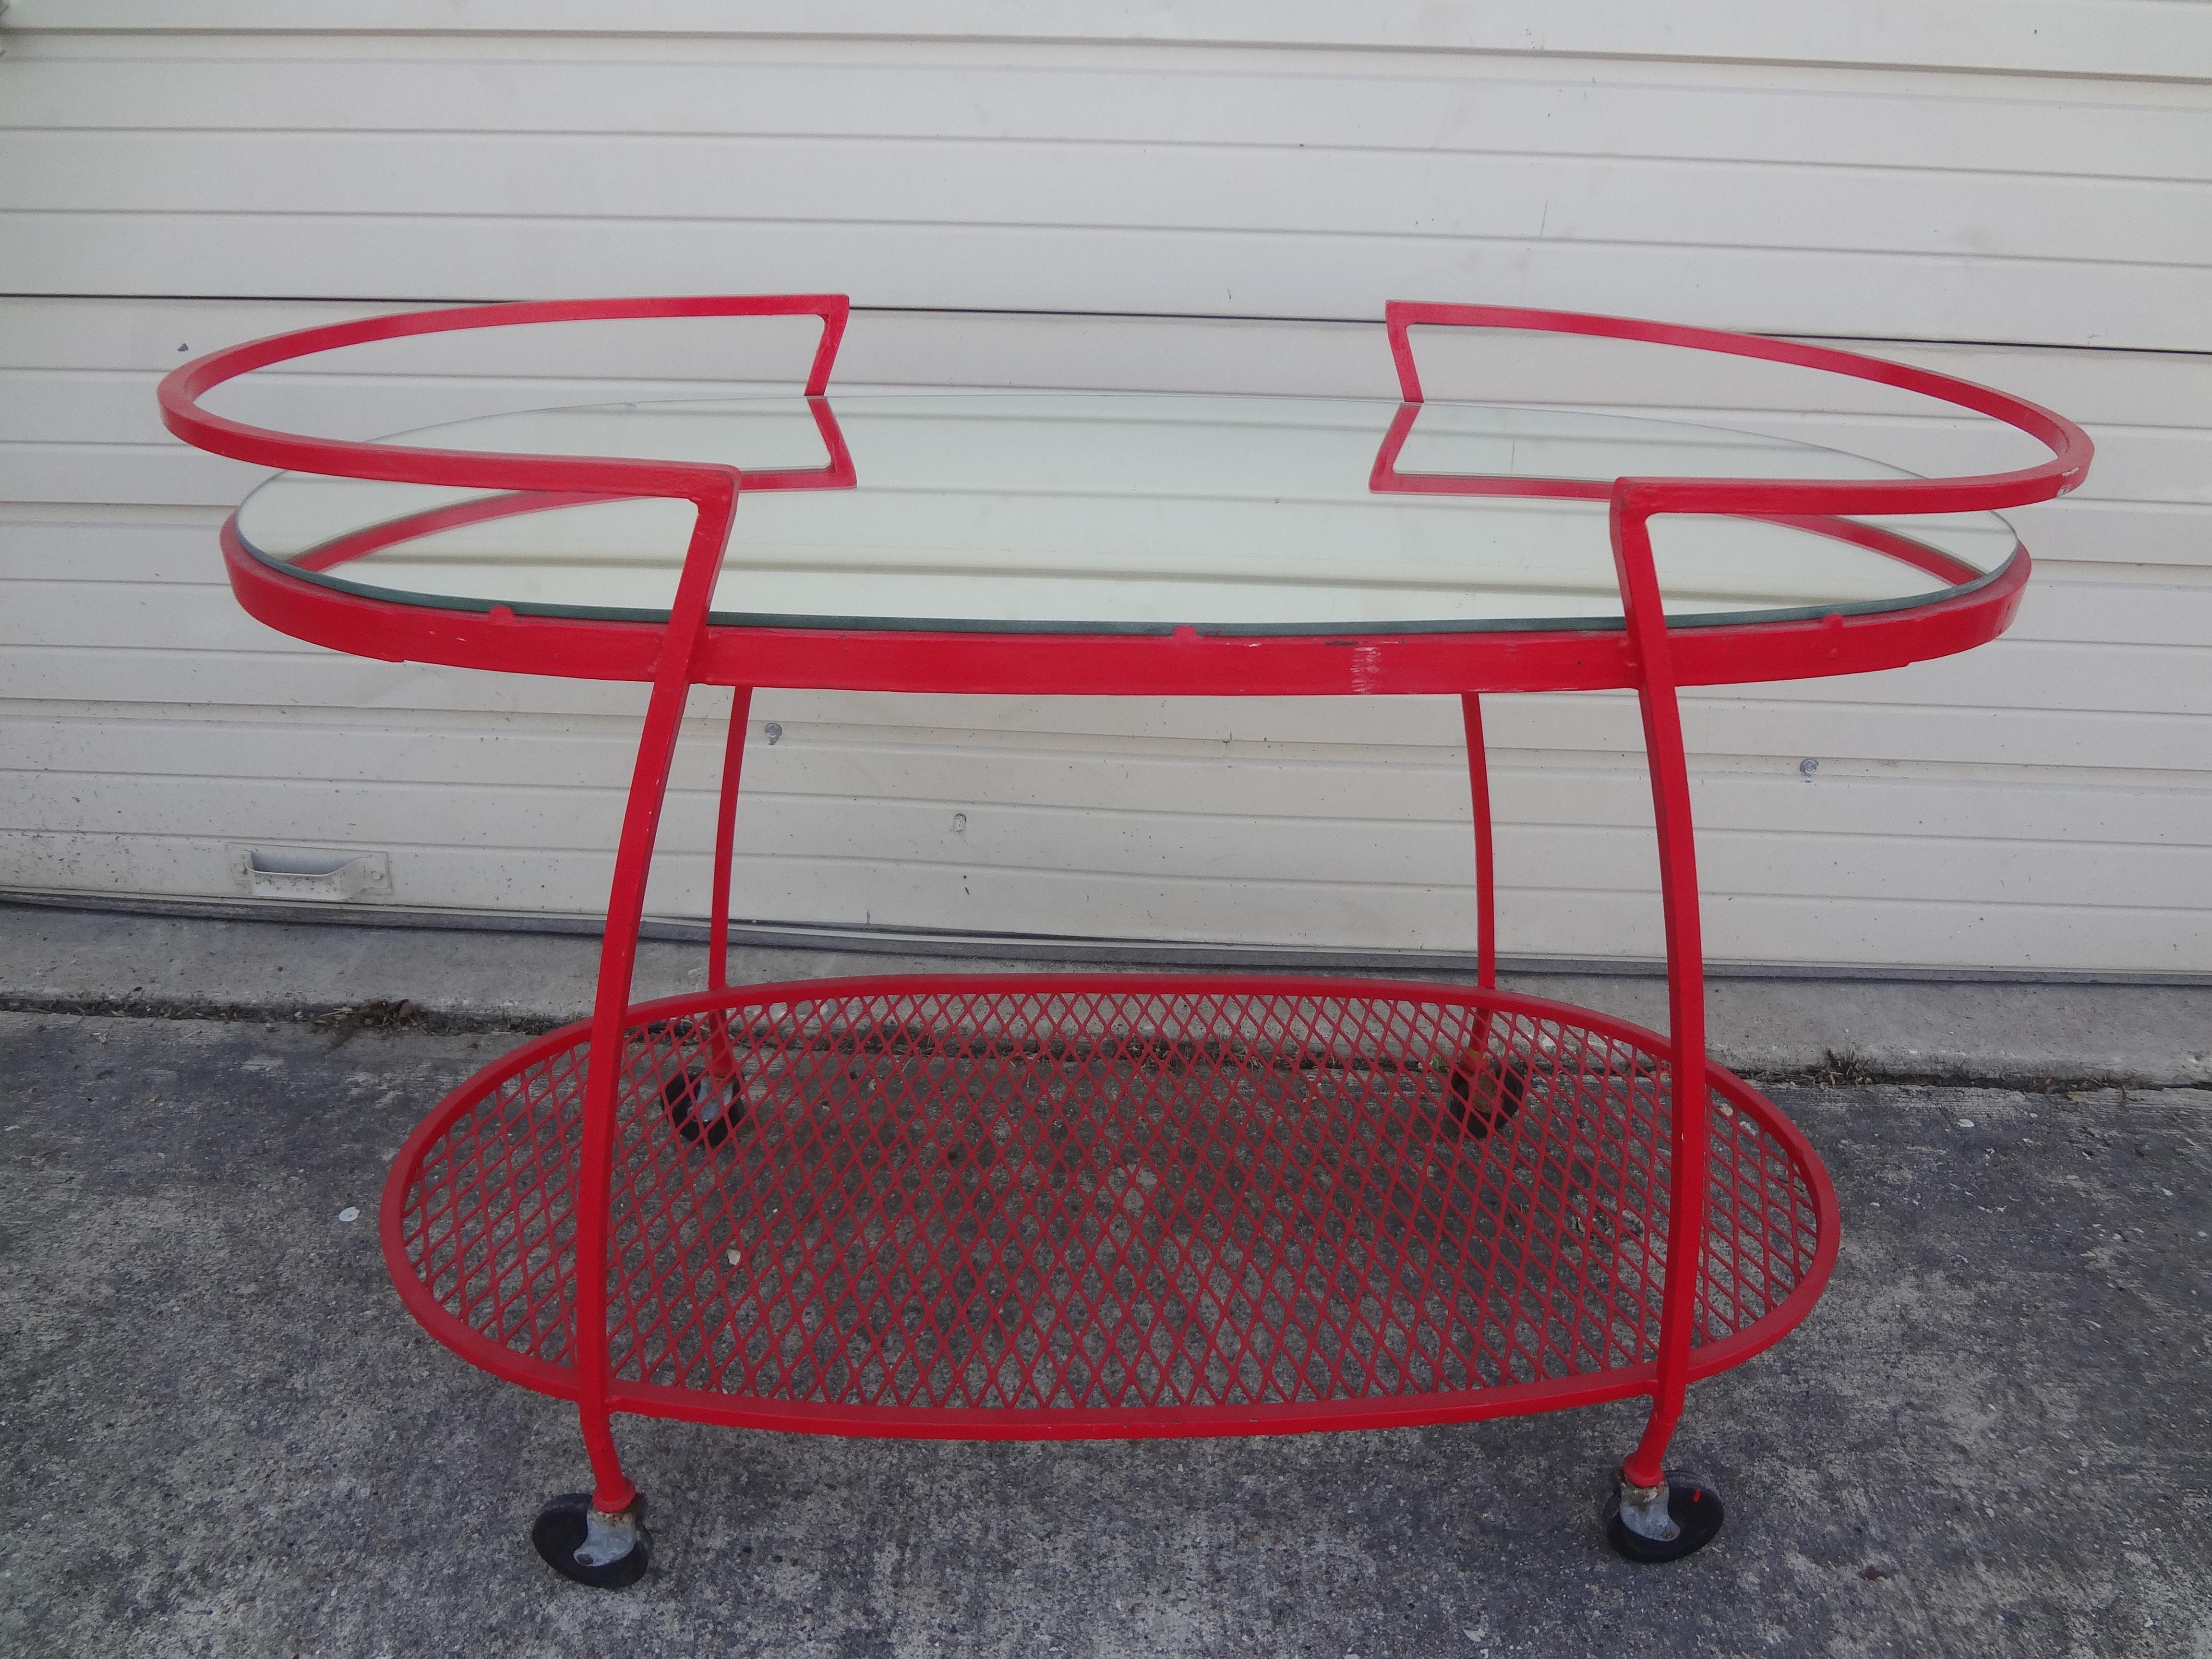 Midcentury wrought iron bar cart or serving cart by Woodard. This versatile bar cart was designed by Russell Woodard for Woodard Furniture Company.
This stunning large iron serving cart, drinks cart, bar cart or serving trolley in a stunning red